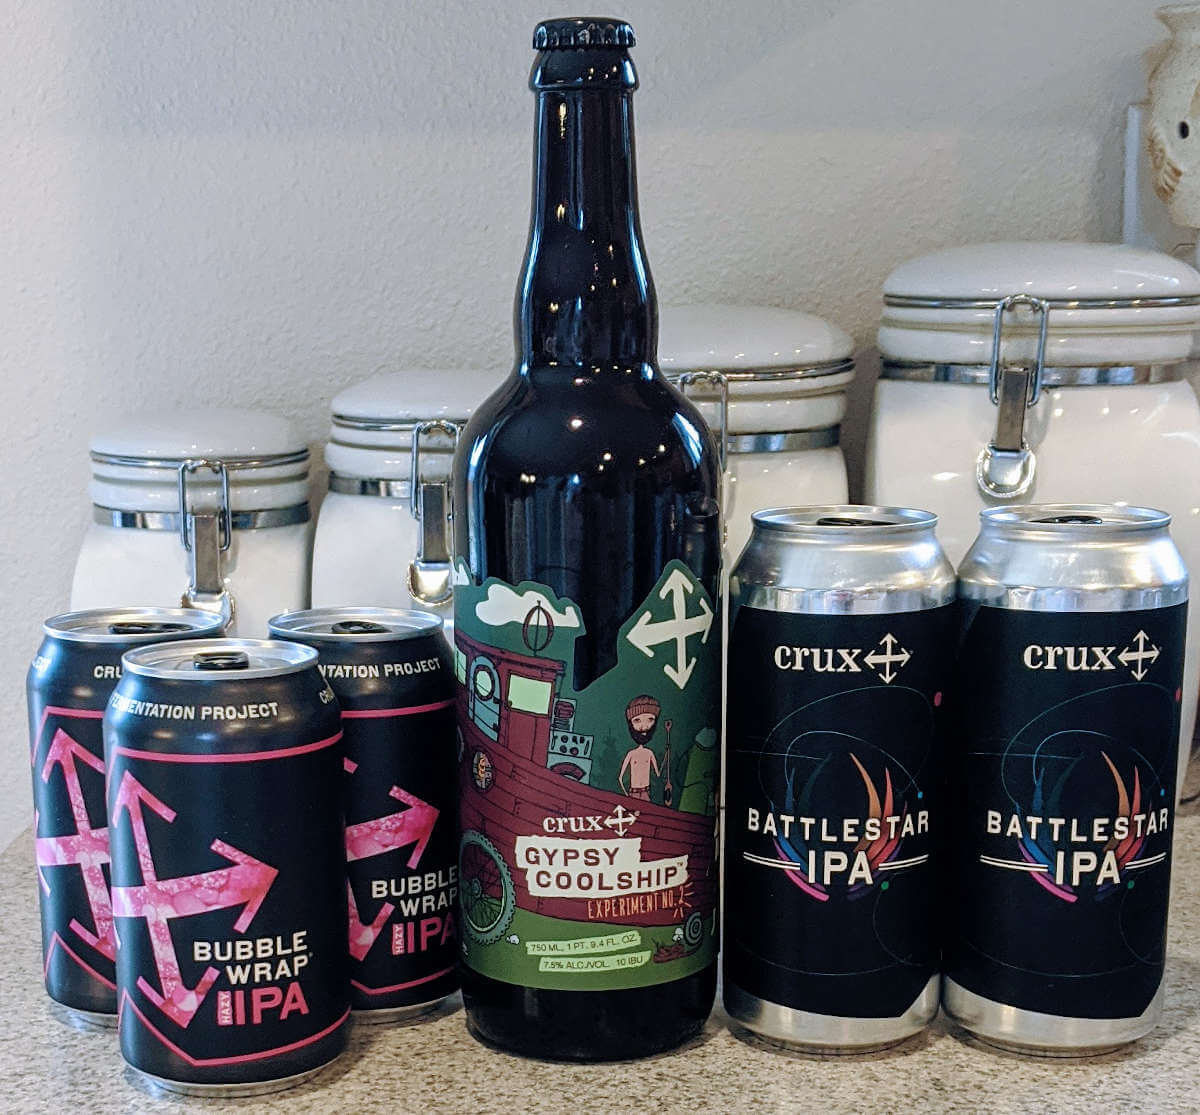 Crux Fermentation Project releases 2 new IPAs and Gypsy Coolship No. 2 (and I’ve got them)